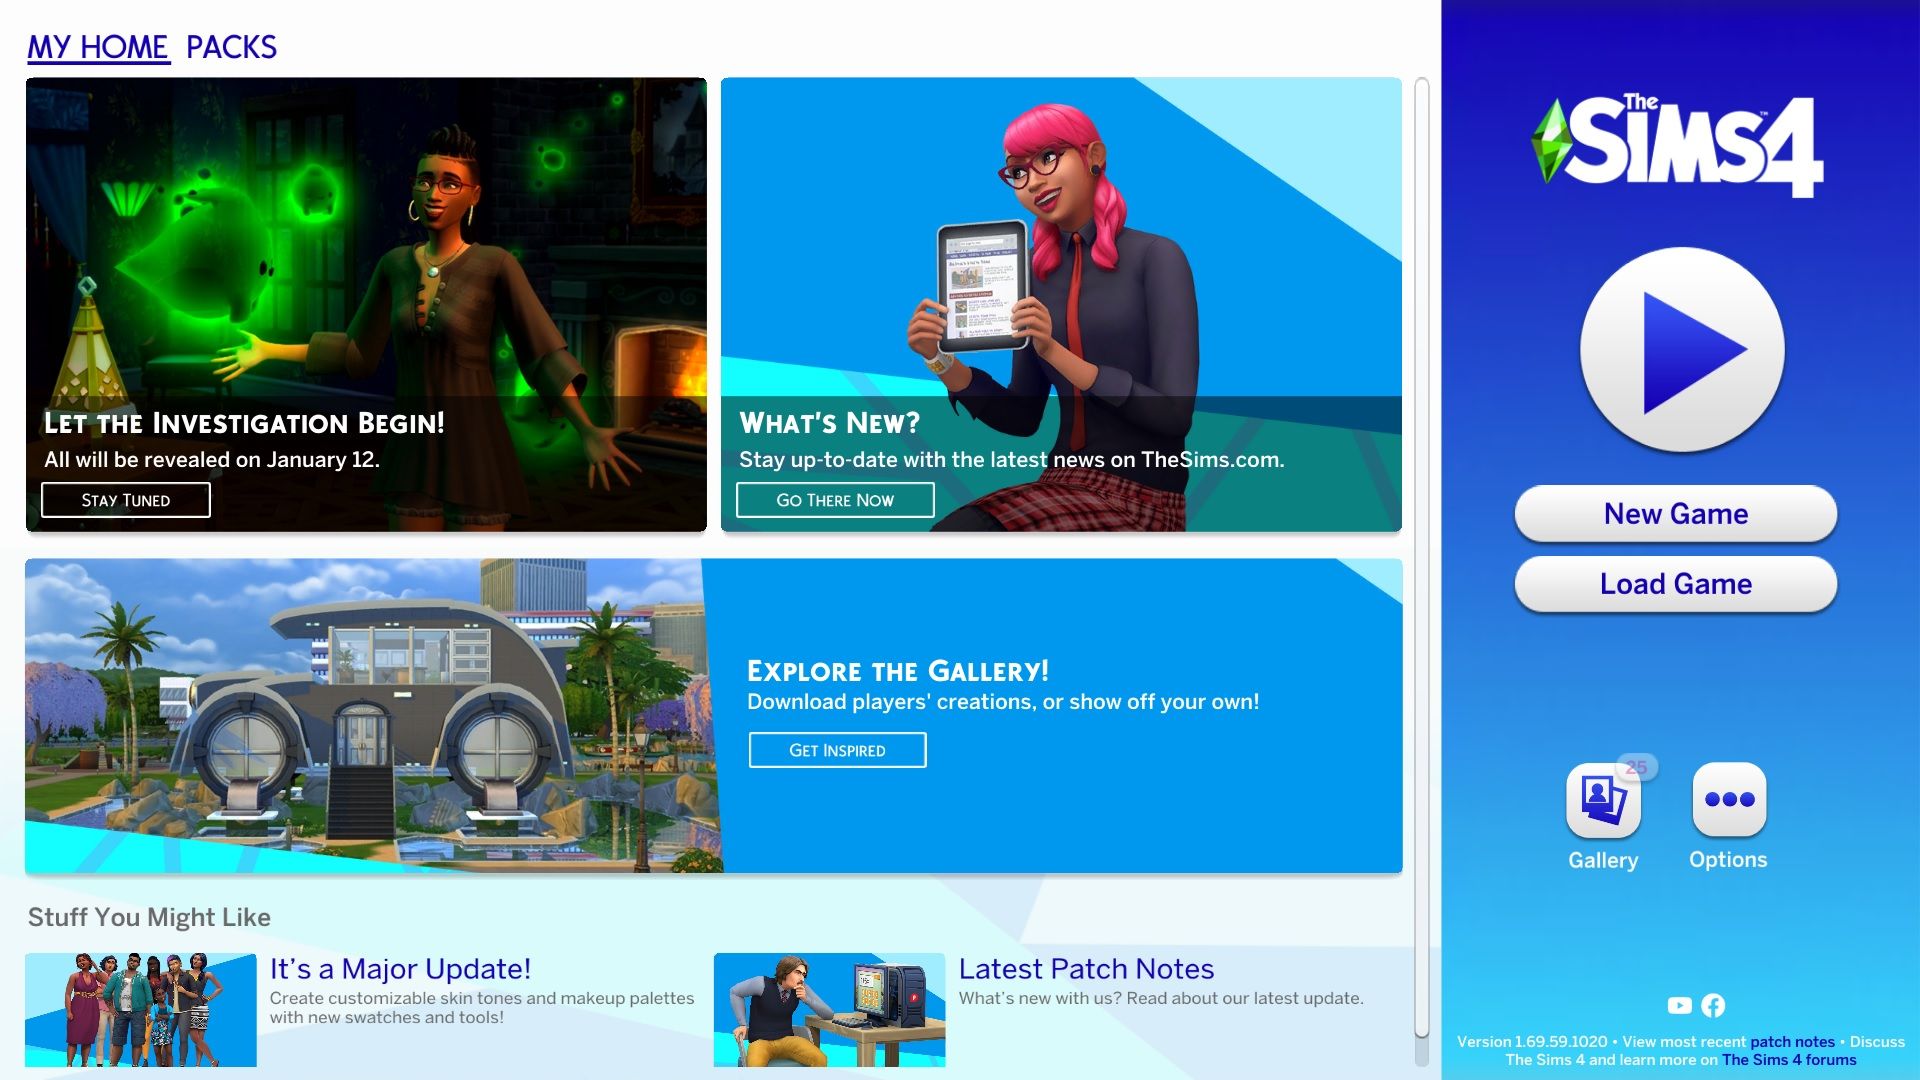 sims 4 expansion packs coming soon